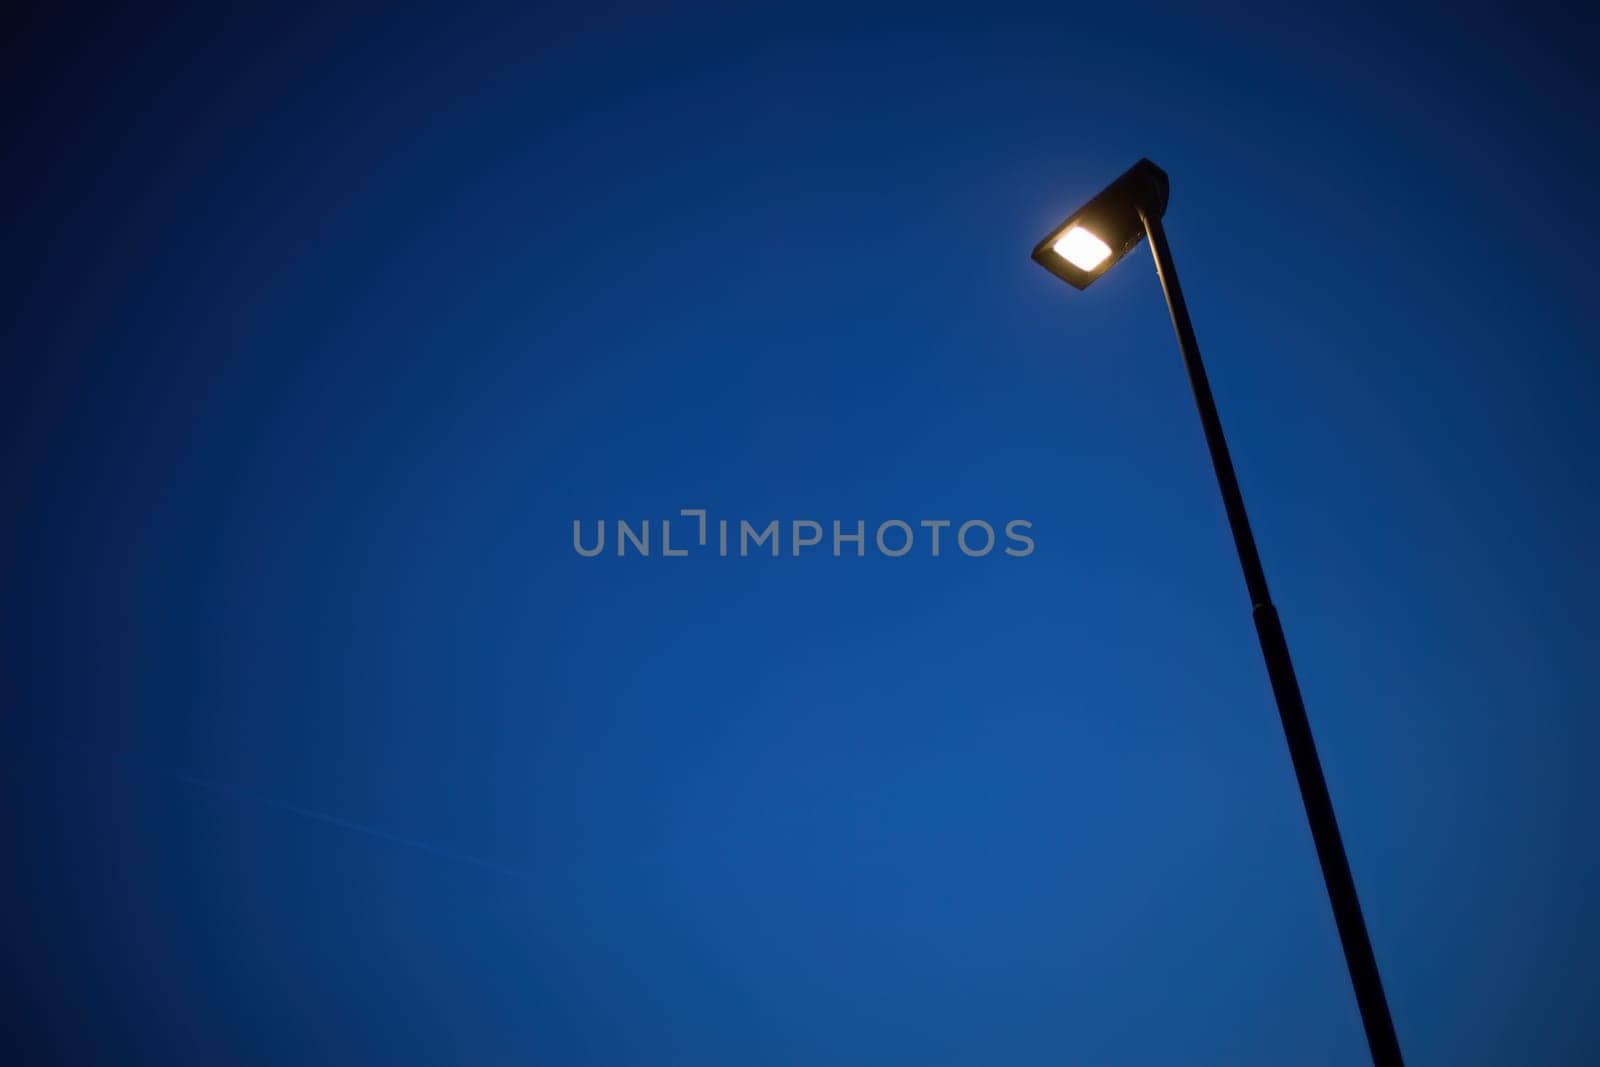 A lone street lamp casts a warm glow on the surrounding darkness, symbolizing solitude and peace.